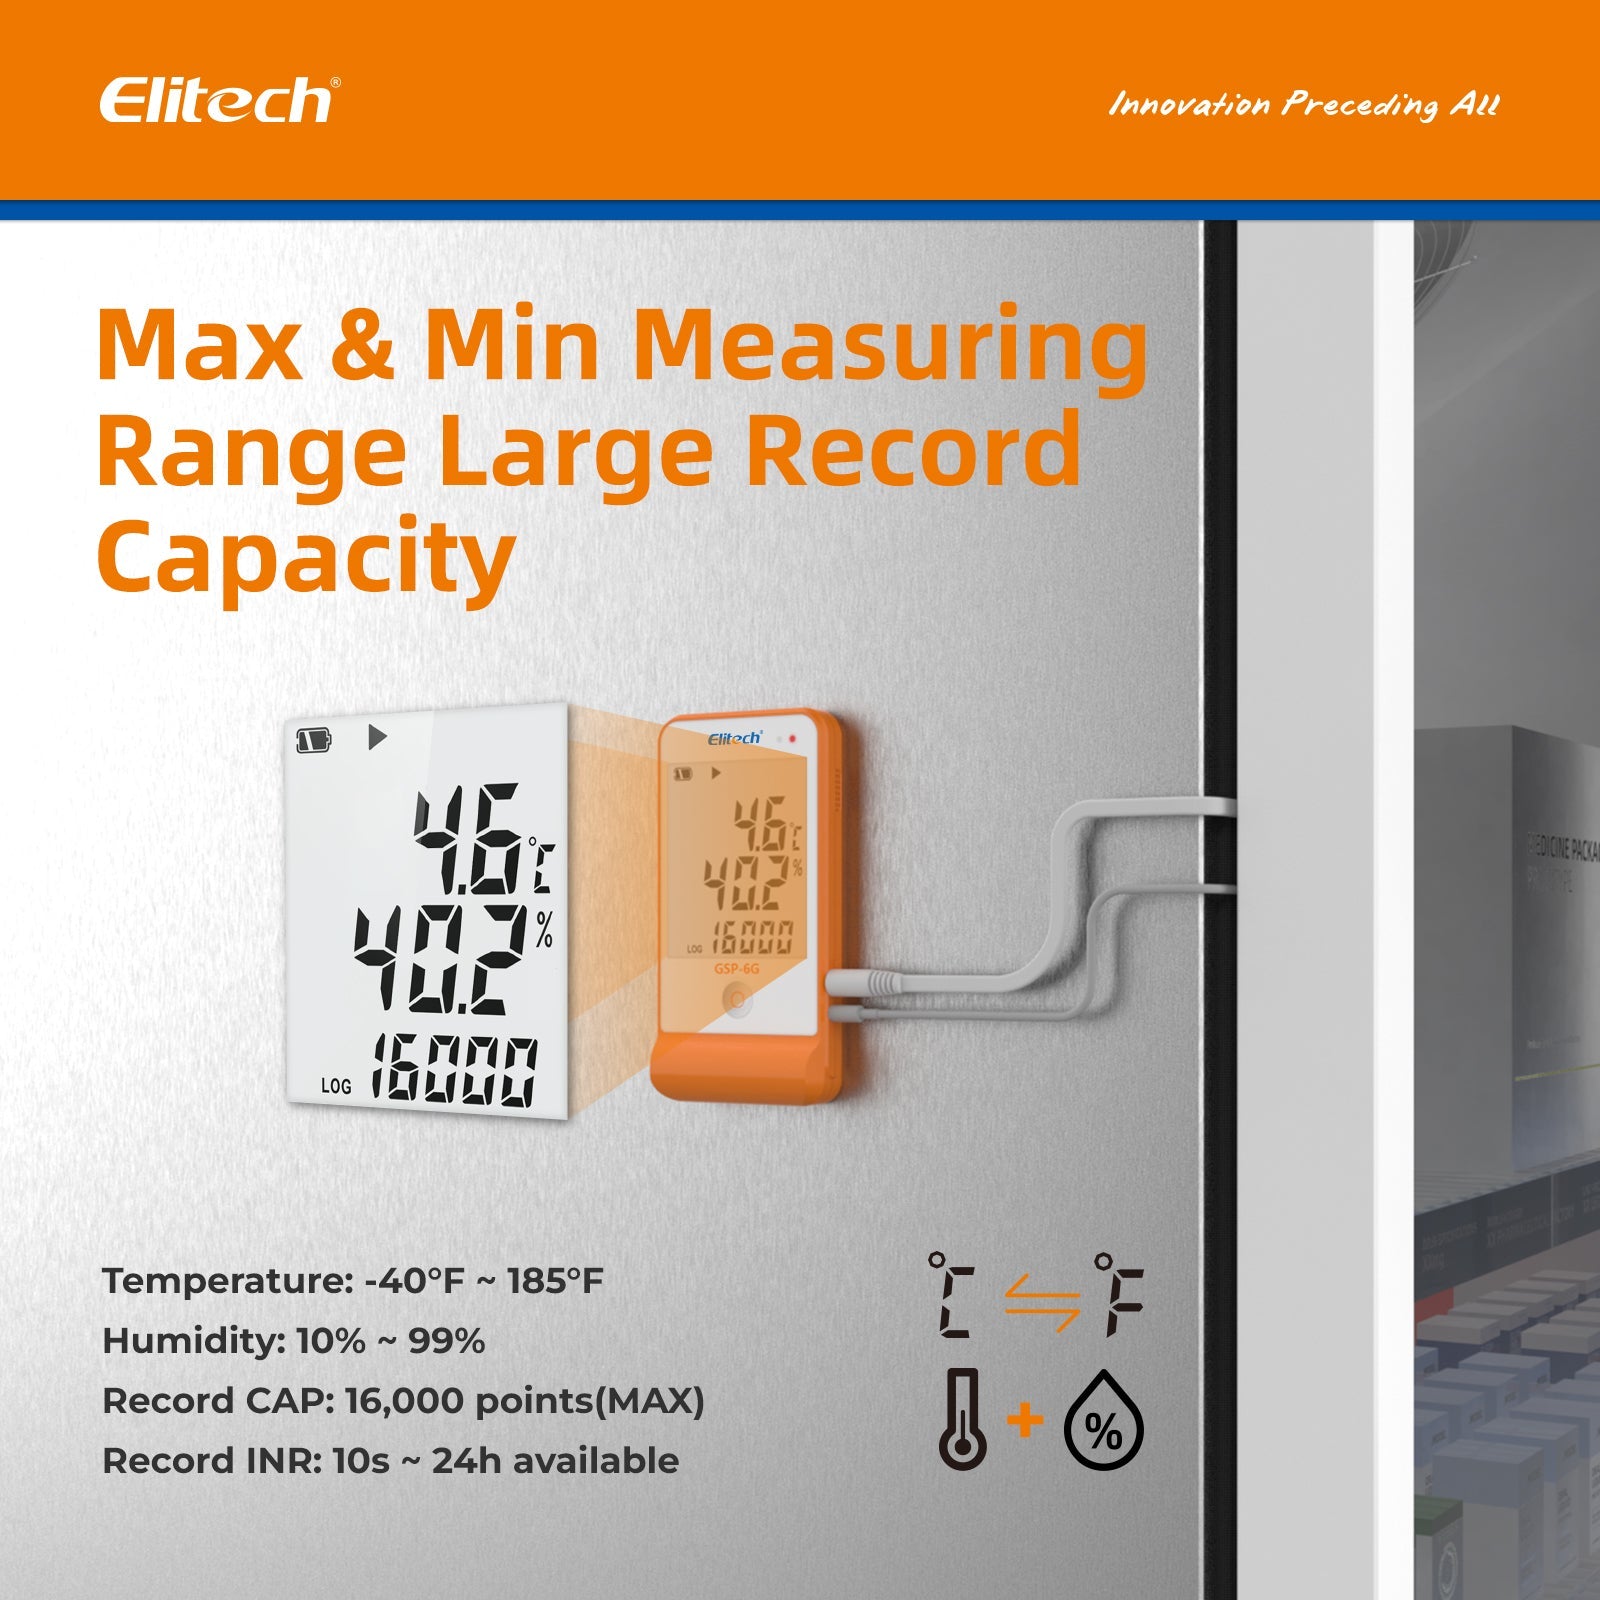 Elitech GSP-6G Digital Temperature and Humidity Data Logger with Detachable Buffered Probe with Calibration Certificate - Elitech Technology, Inc.